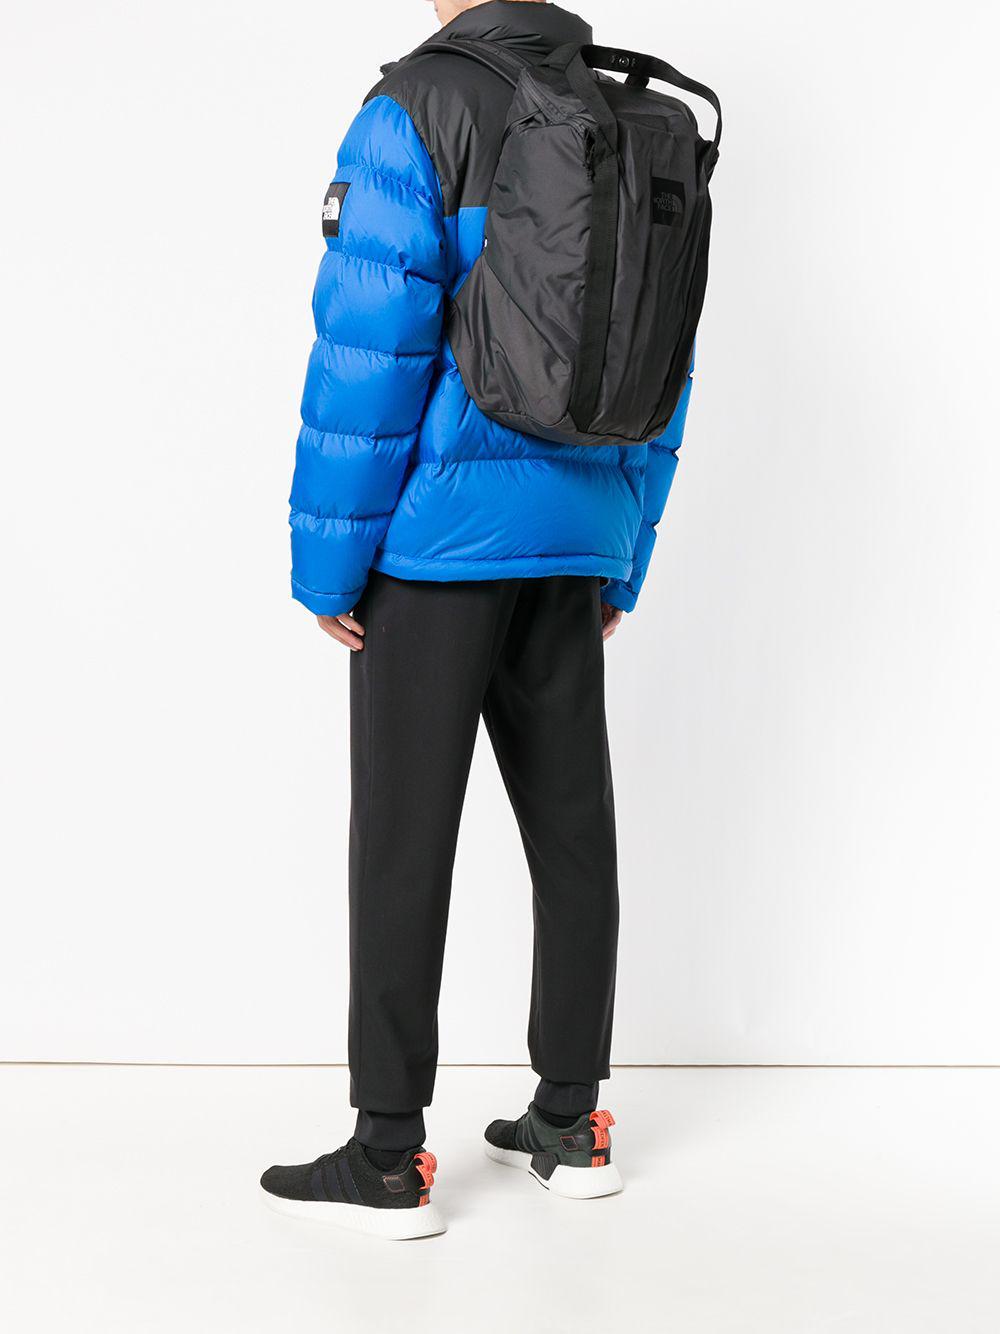 north face 32l backpack